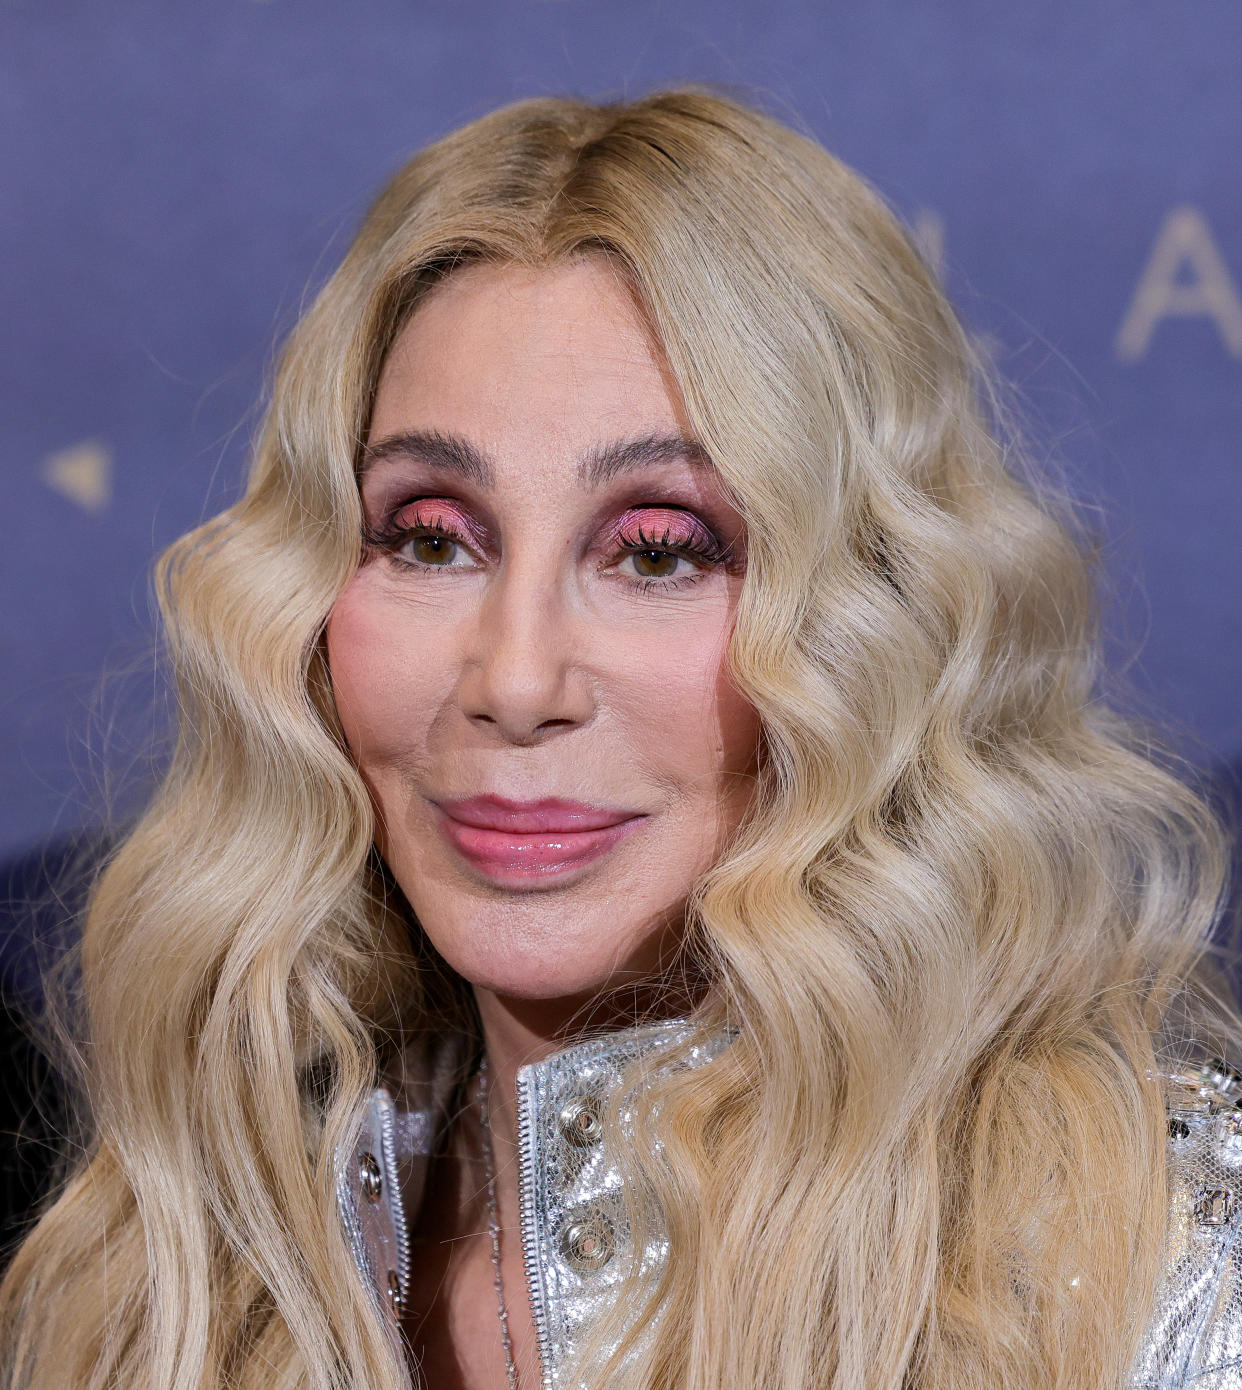 LAS VEGAS, NEVADA - DECEMBER 13: Cher attends the grand opening of Fontainebleau Las Vegas on December 13, 2023 in Las Vegas, Nevada. (Photo by Ethan Miller/Getty Images)